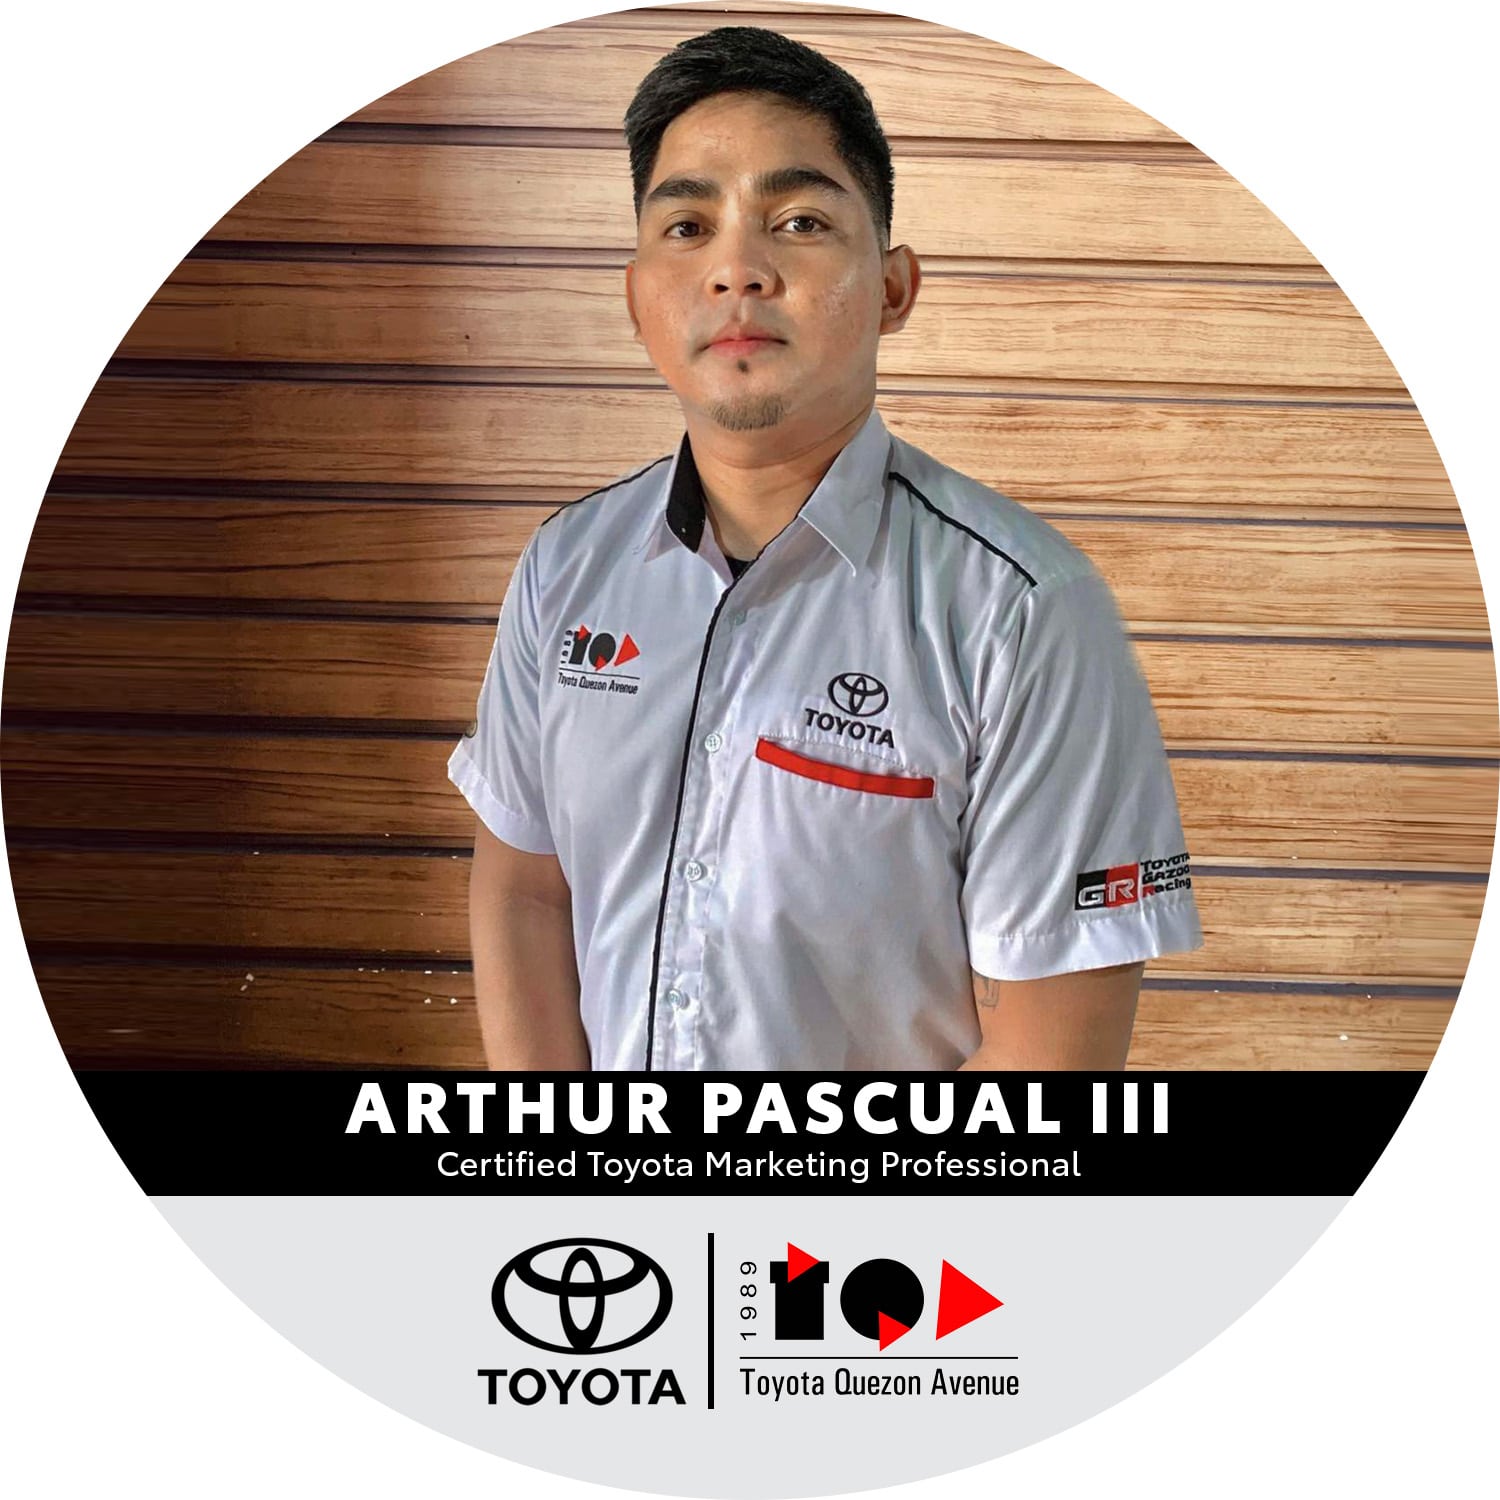 Certified Toyota Marketing Professionals - Arthur Pascual III